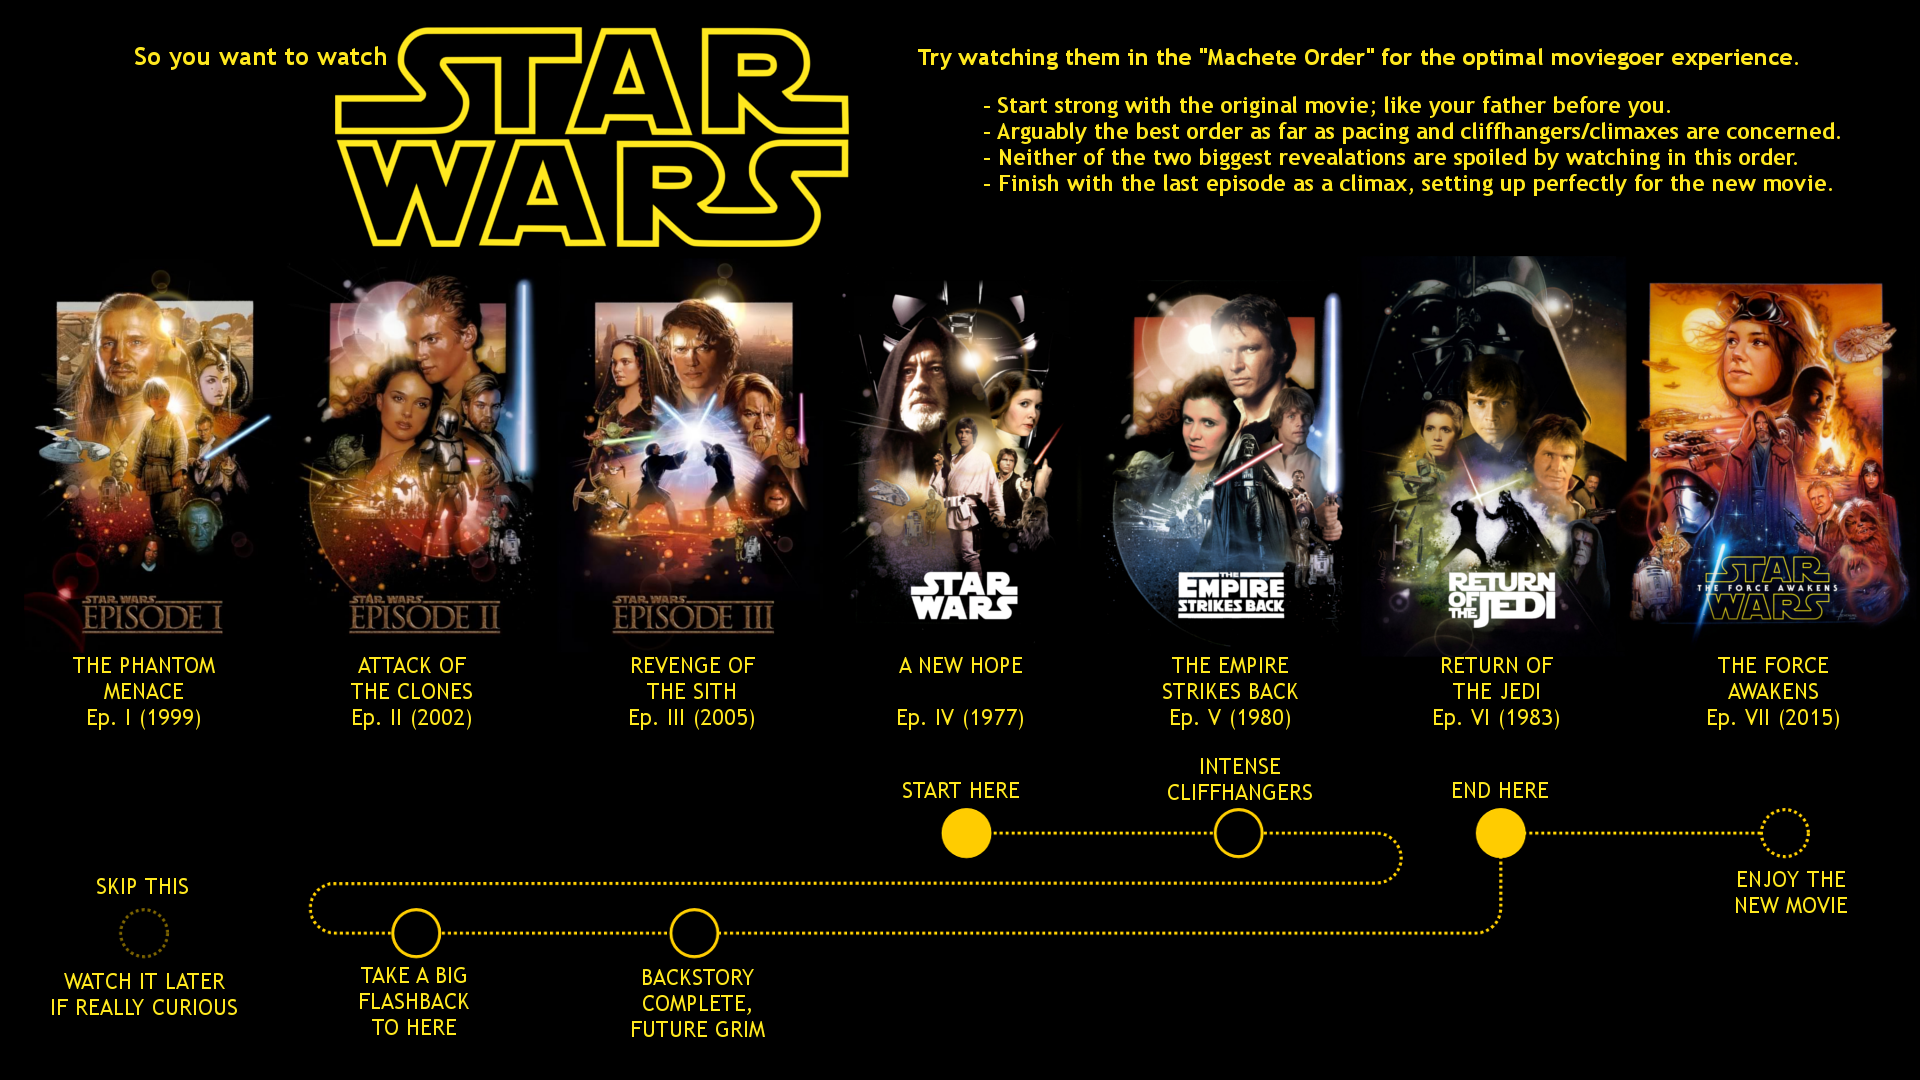 How To Watch Star Wars Movies In Order On Disney+